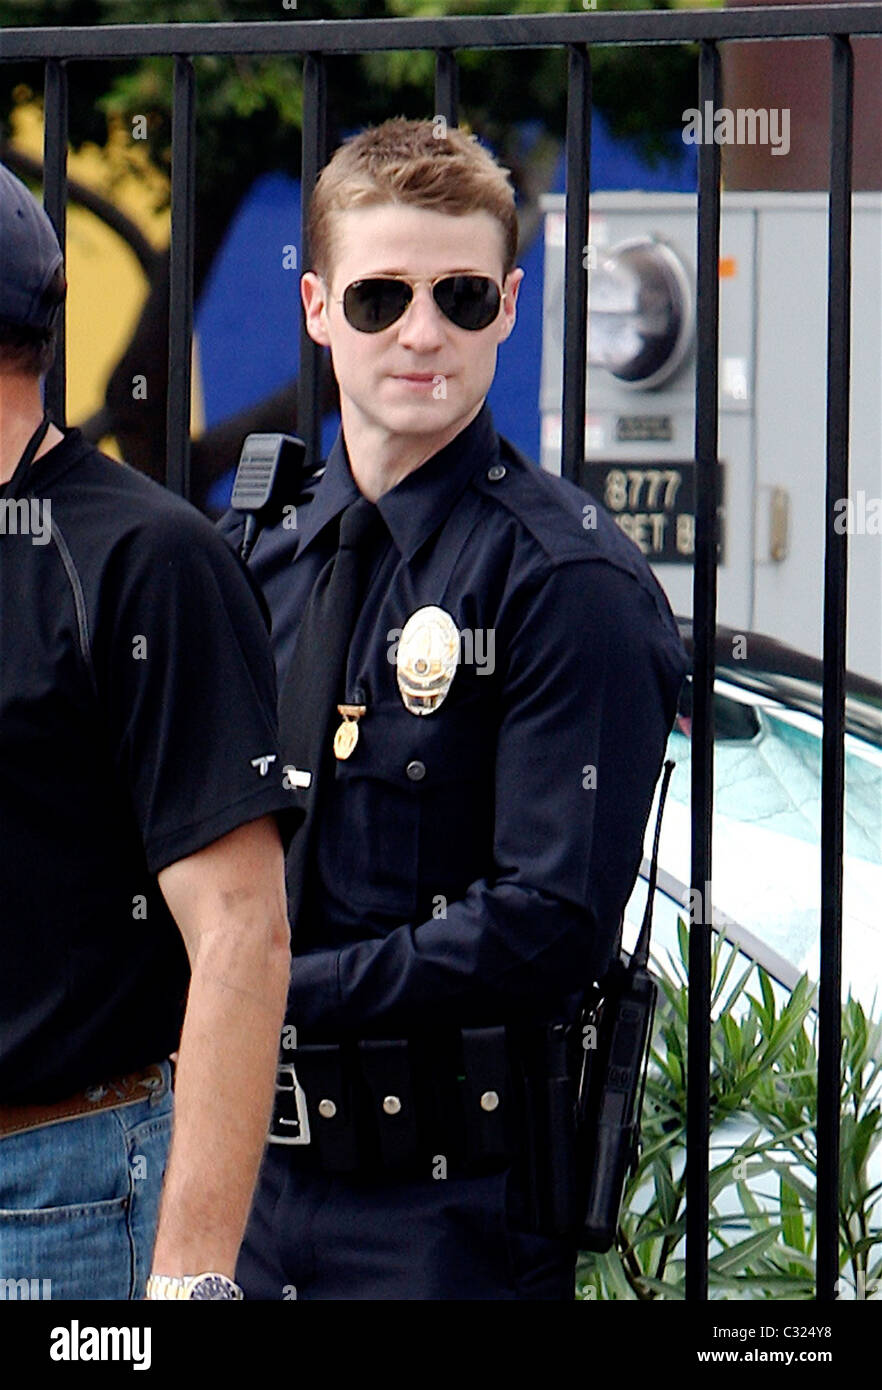 Benjamin McKenzie films a scene for an upcoming movie dressed as an LAPD officer Los Angeles, California - 29.09.08 Stock Photo